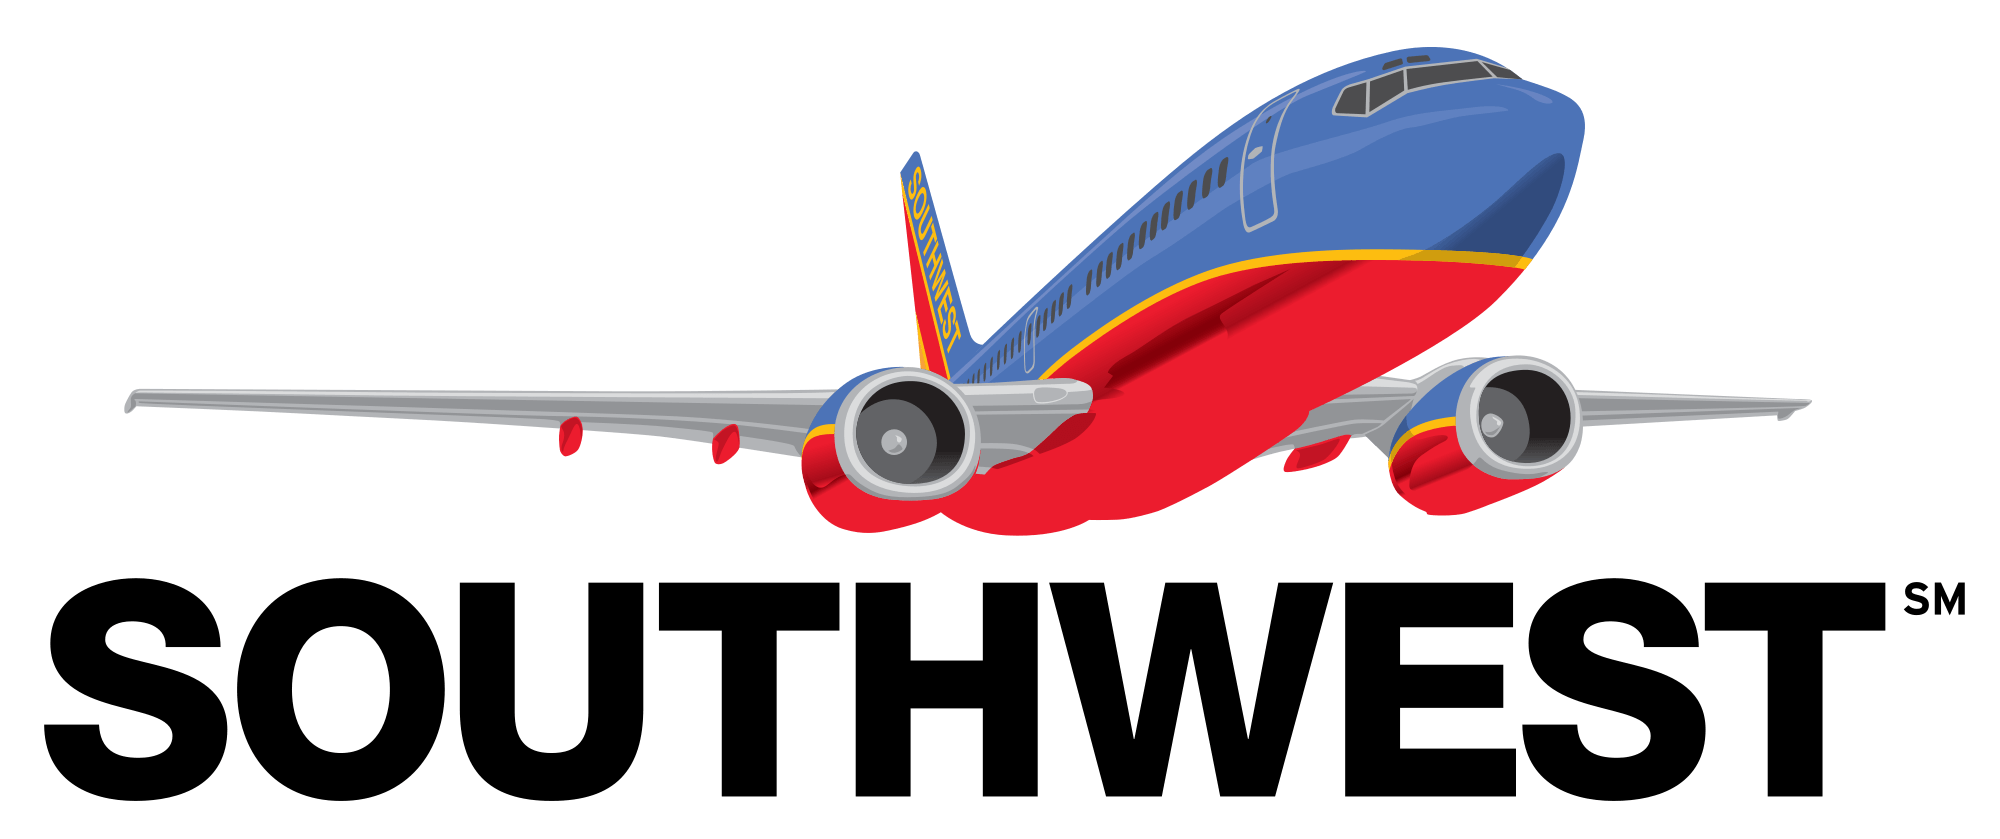 South West Airlines Logo - Southwest Airlines Logo